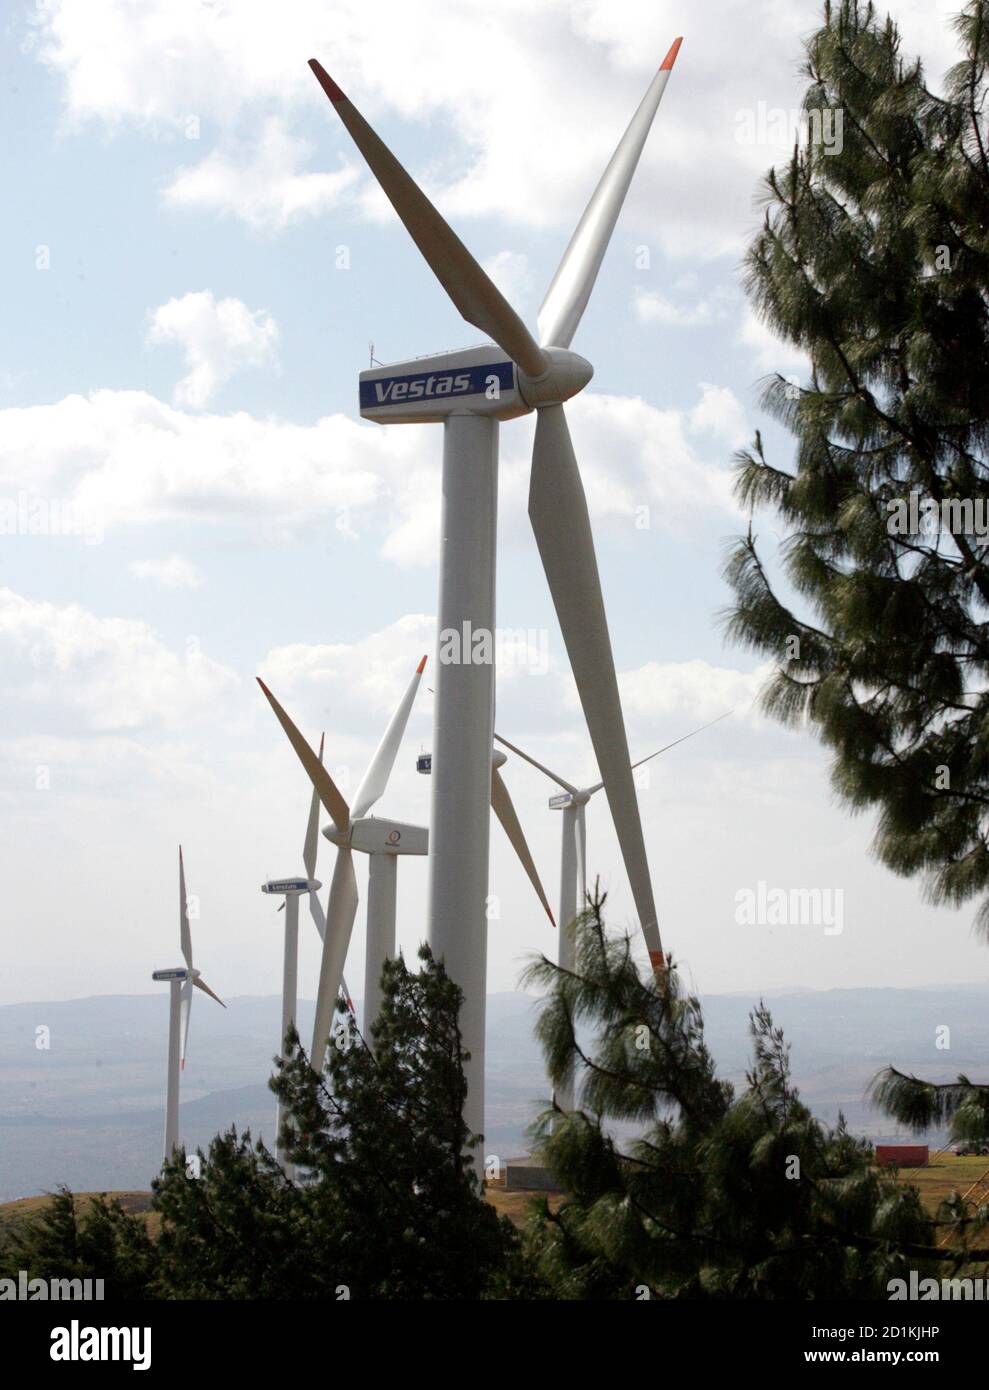 Power-generating wind turbines are seen at the Kenya Electricity Generating Company (KenGen) station in Ngong hills, 22 km (13.7 miles) southwest of Kenya's capital Nairobi, July 17, 2009. Kenya plans to add 2,000 megawatts of more environmentally-friendly energy by 2013 by investing $7-$8 billion, a KenGen official said on Friday. KenGen is setting up some wind turbines and a private company is planning a 300 MW wind farm in Kenya's northeastern region by 2012. To match INTERVIEW KENYA-ENERGY/      REUTERS/Thomas Mukoya (KENYA ENERGY BUSINESS) Stock Photo